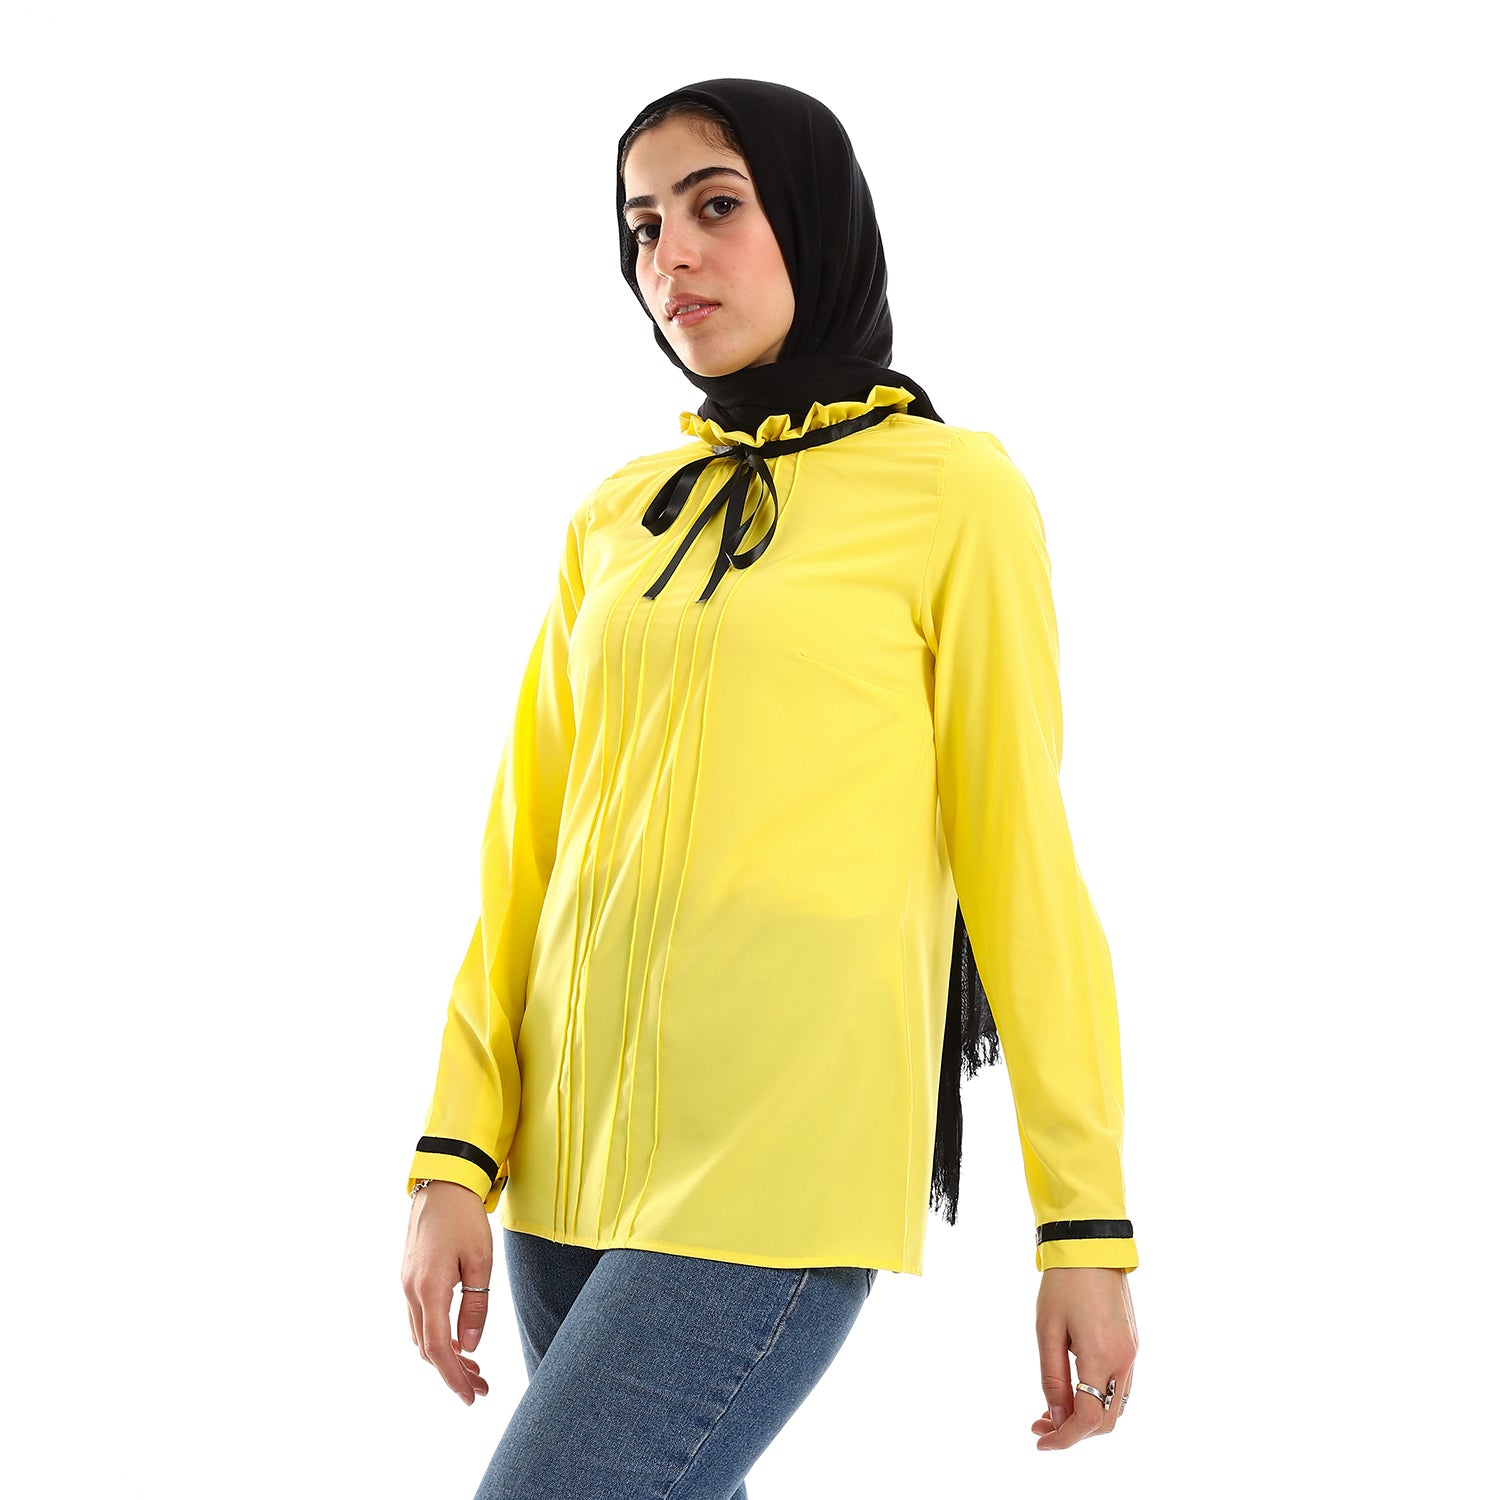 Buttoned Cuffs Stitched Chest Yellow & Black Blouse